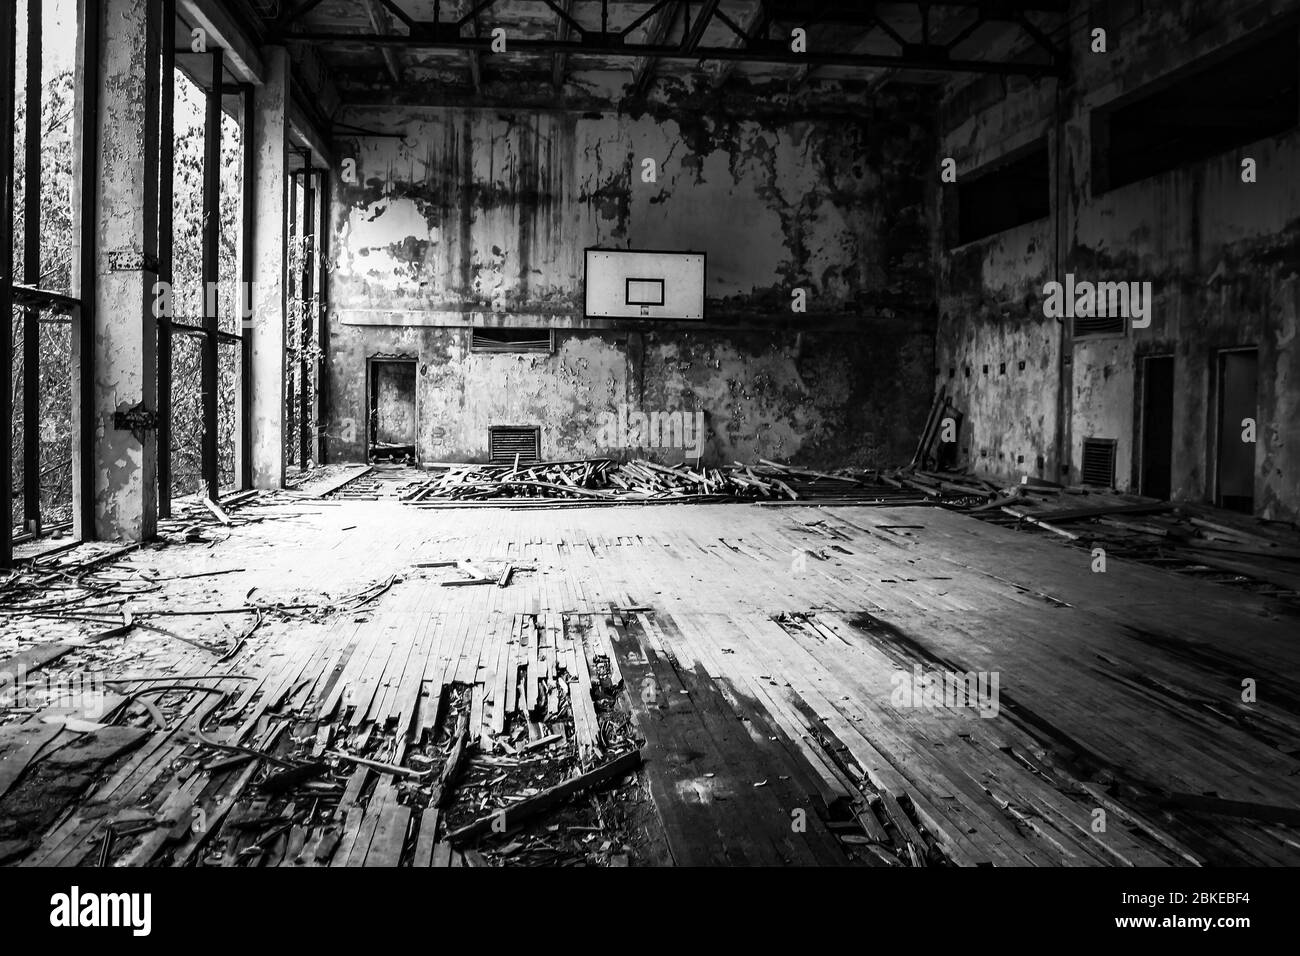 Black and white decaying basketball court in Pripyat, Ukraine, abandoned city after the 1986 Chernobyl nuclear desaster. Stock Photo